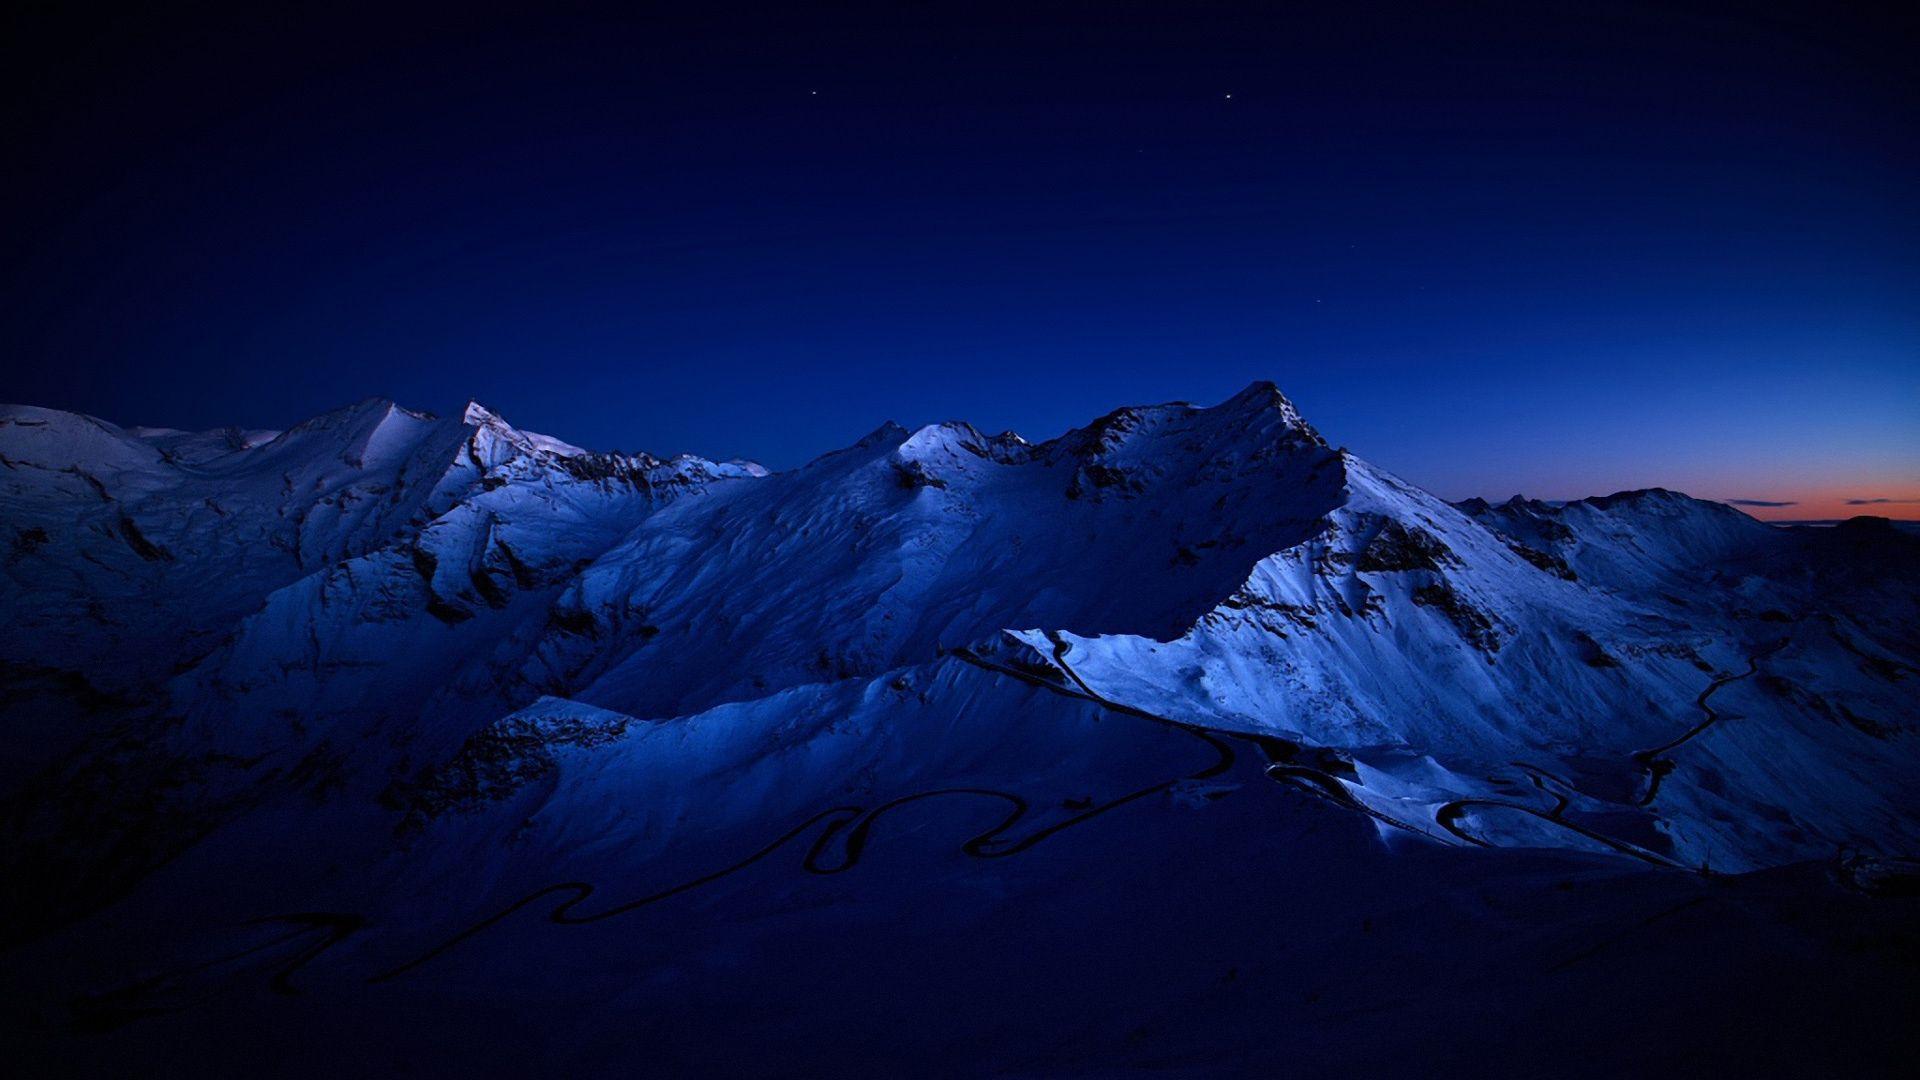 Wallpaper mountains, night, sky, road, bends, darkness. Mountains at night, Mountain picture, Mountain wallpaper